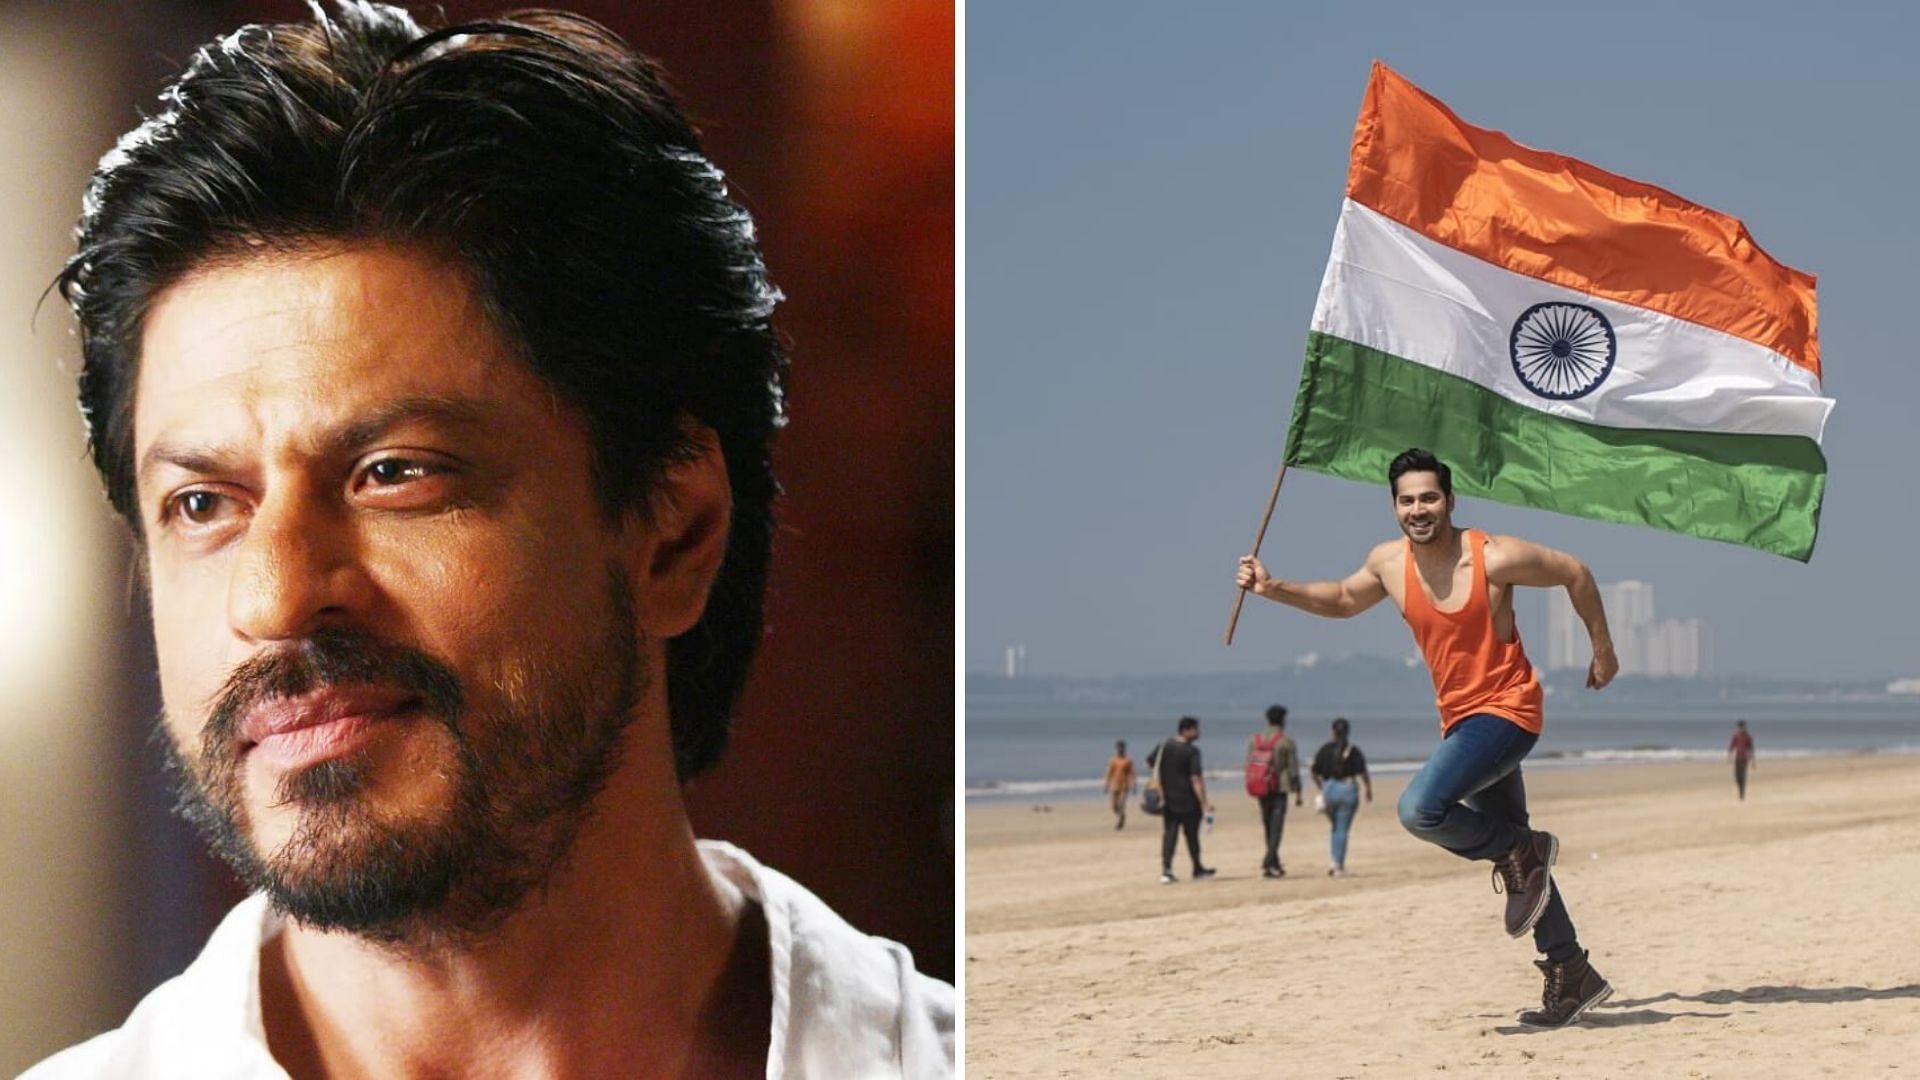 SRK on being Indian, Varun Dhawan poses with the Indian flag.